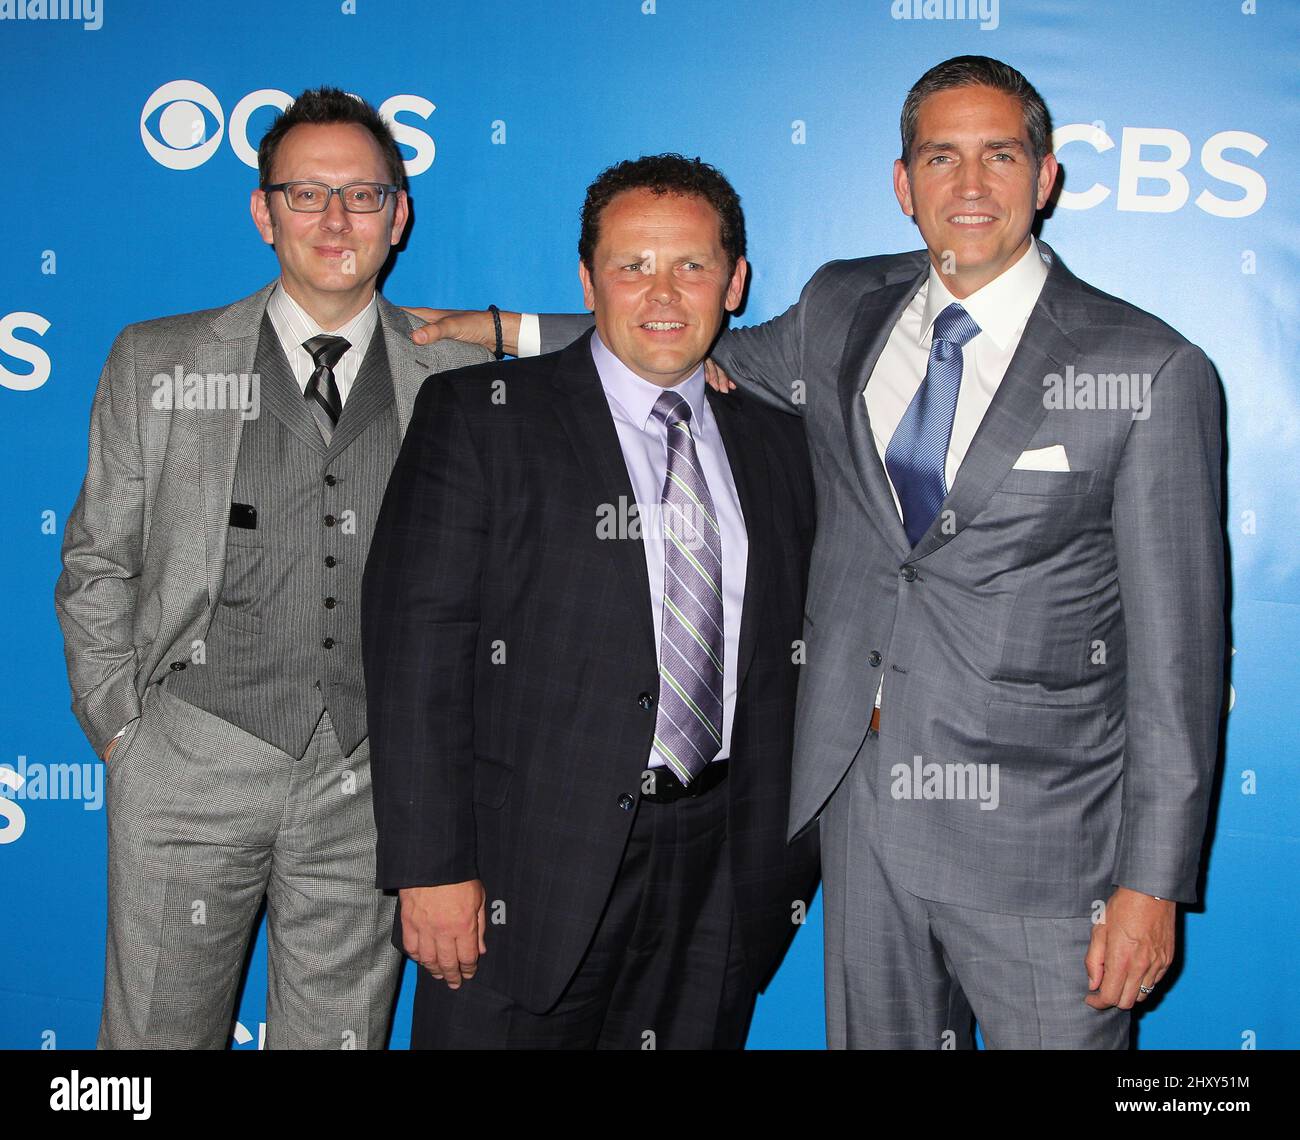 Michael Emerson, Kevin Chapman and Jim Caviezel attends the CBS 2012 Upfronts event in New York. Stock Photo